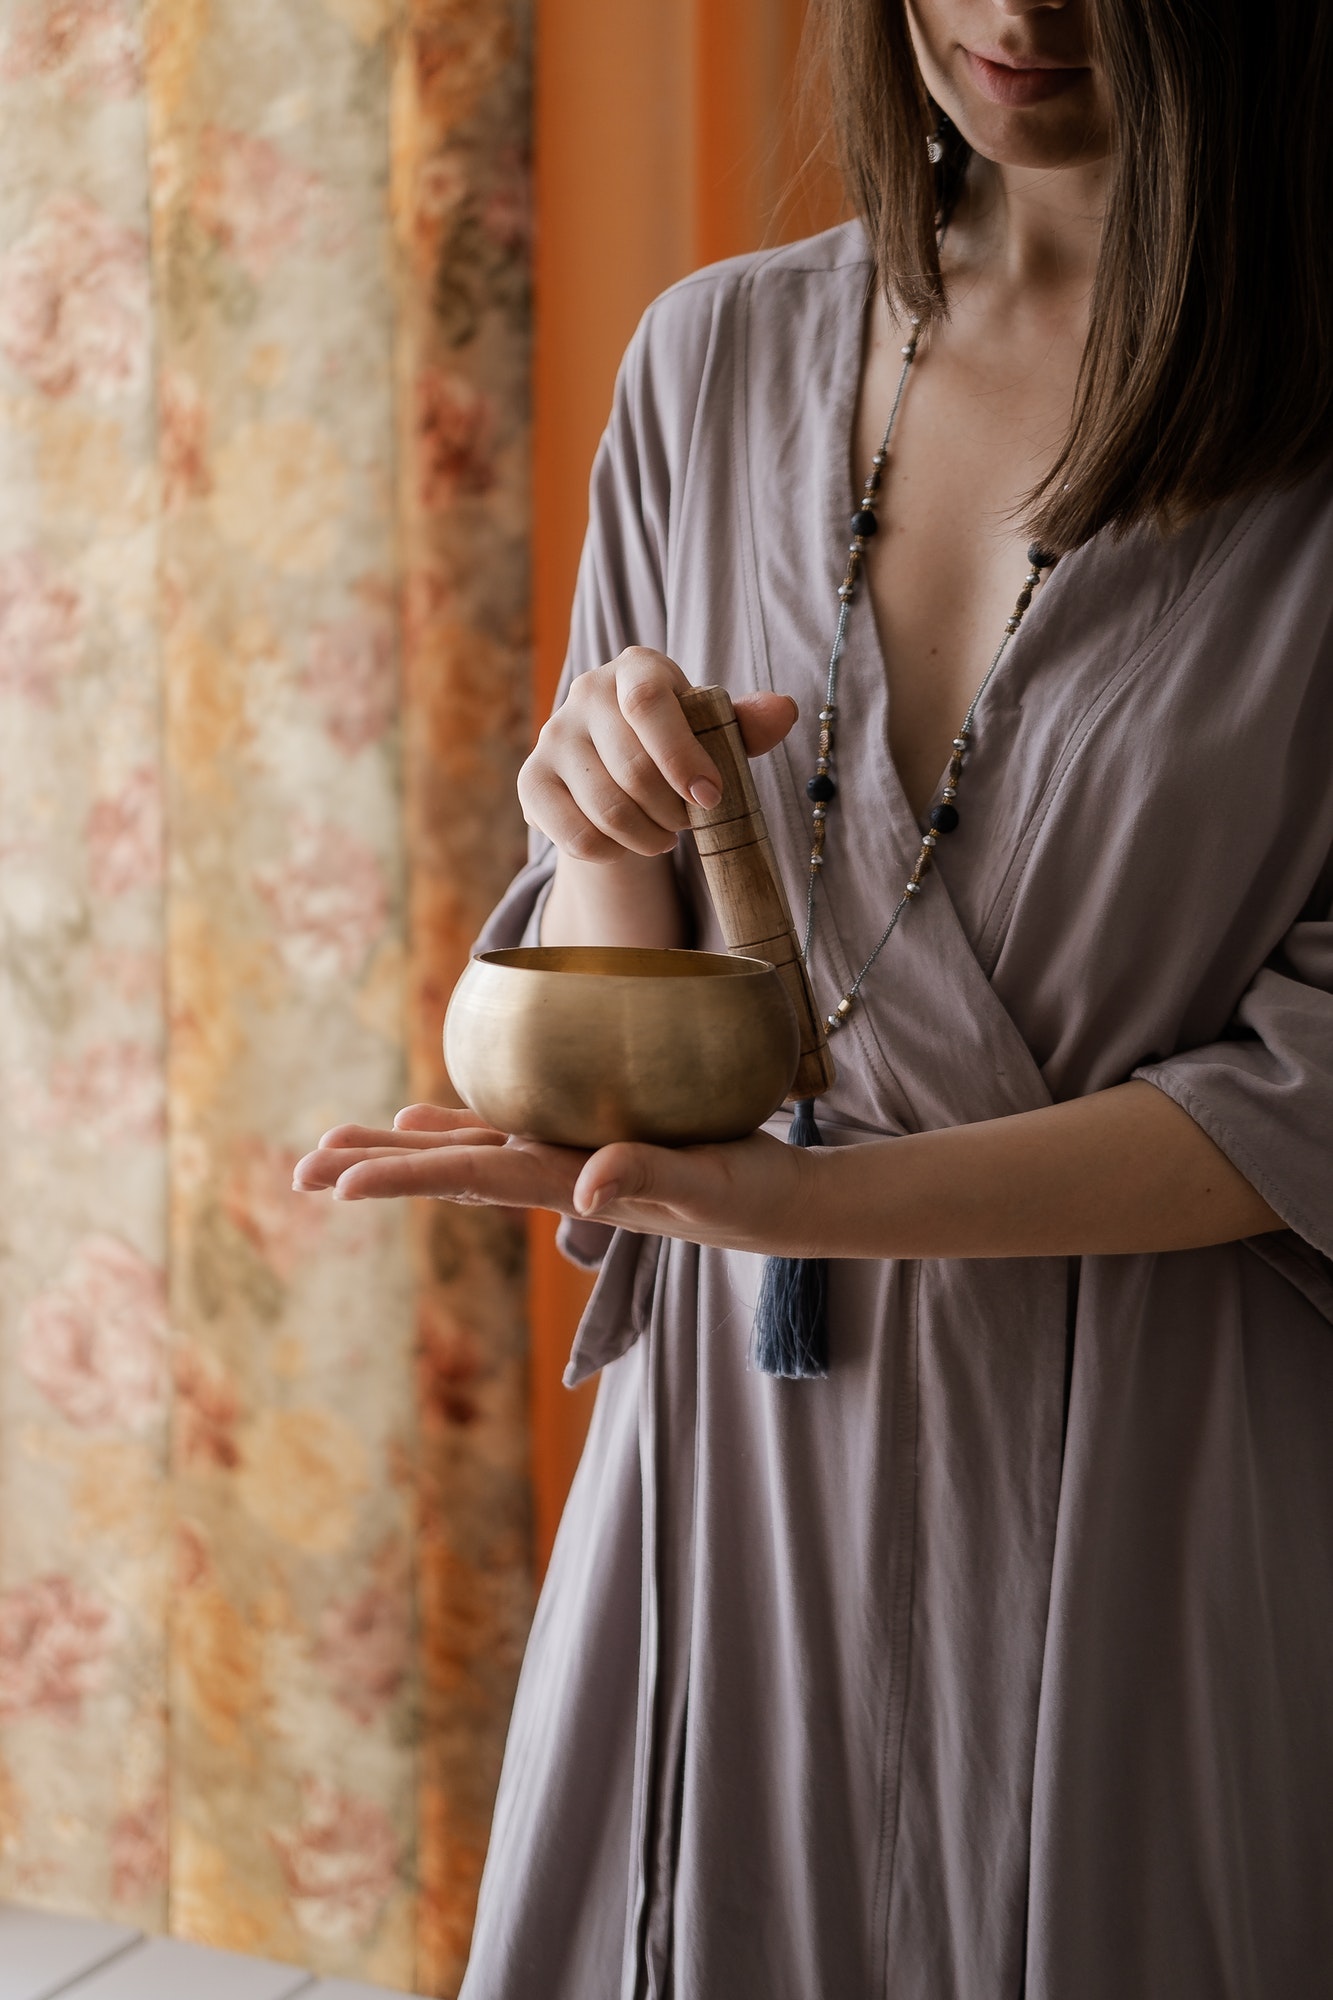 Woman holding in hands singing bowl